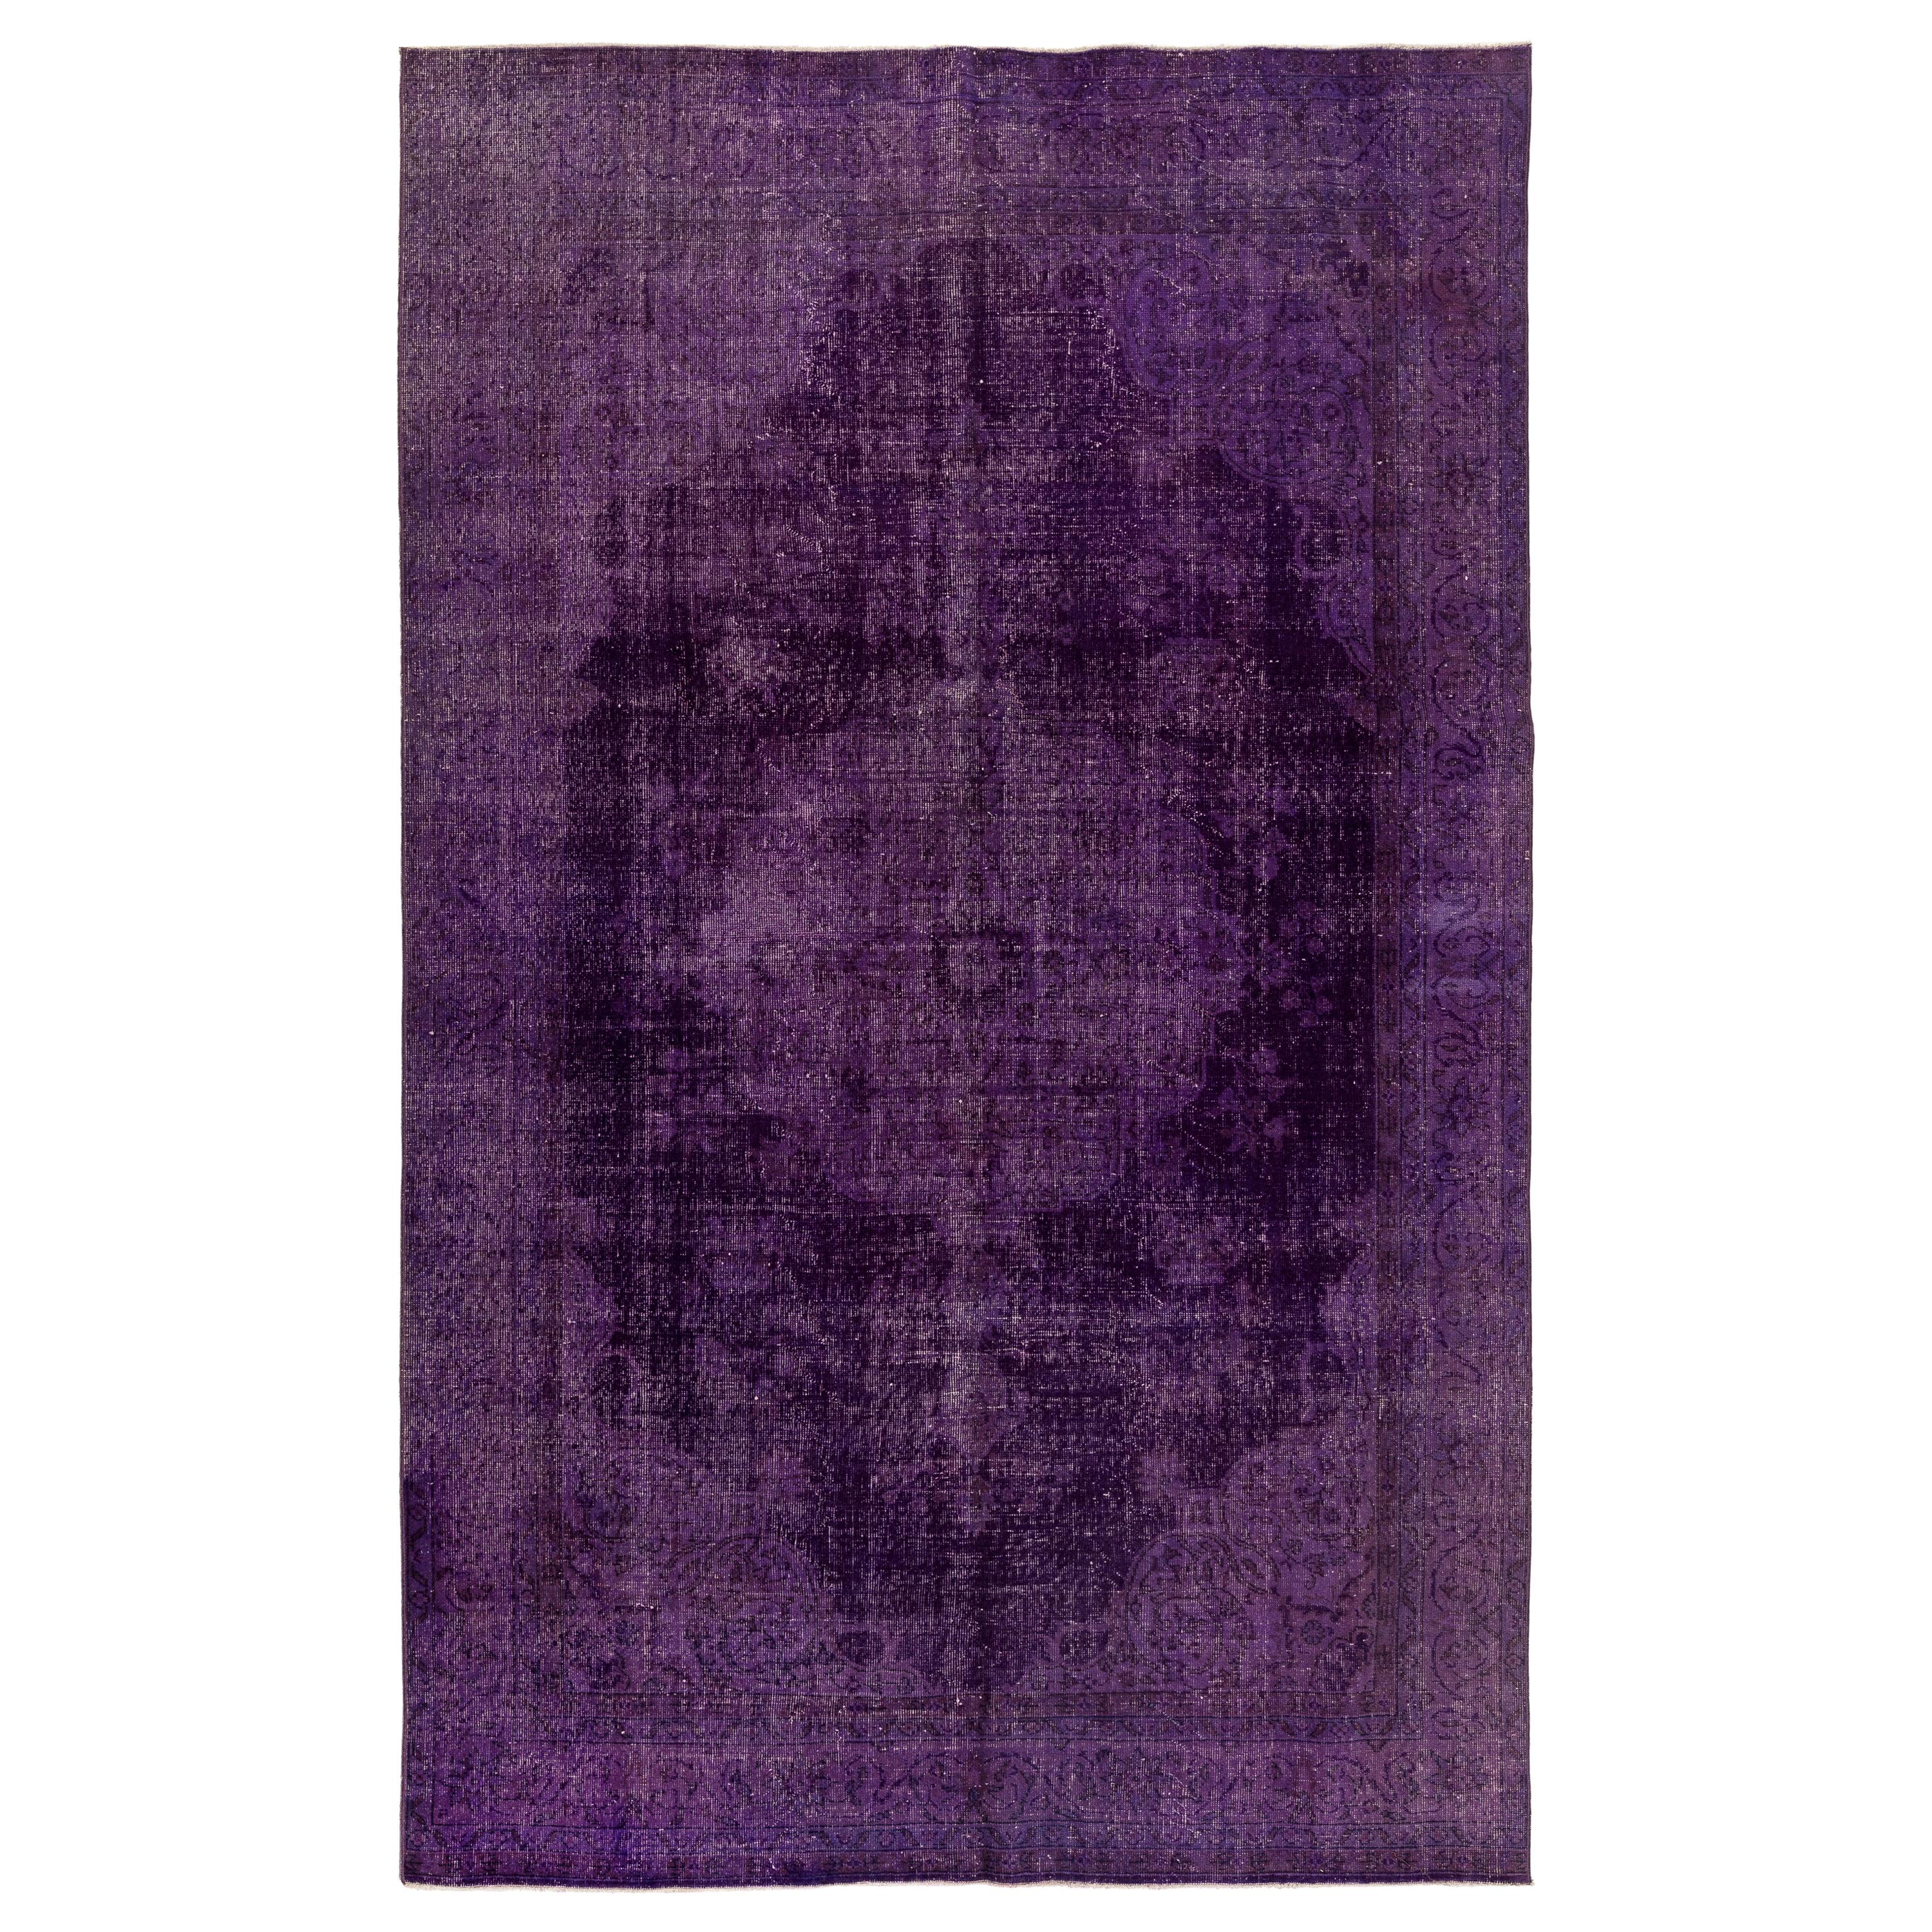 6.4x10 Ft Vintage Turkish Hand-made Medallion Wool Area Rug Over-dyed in Purple